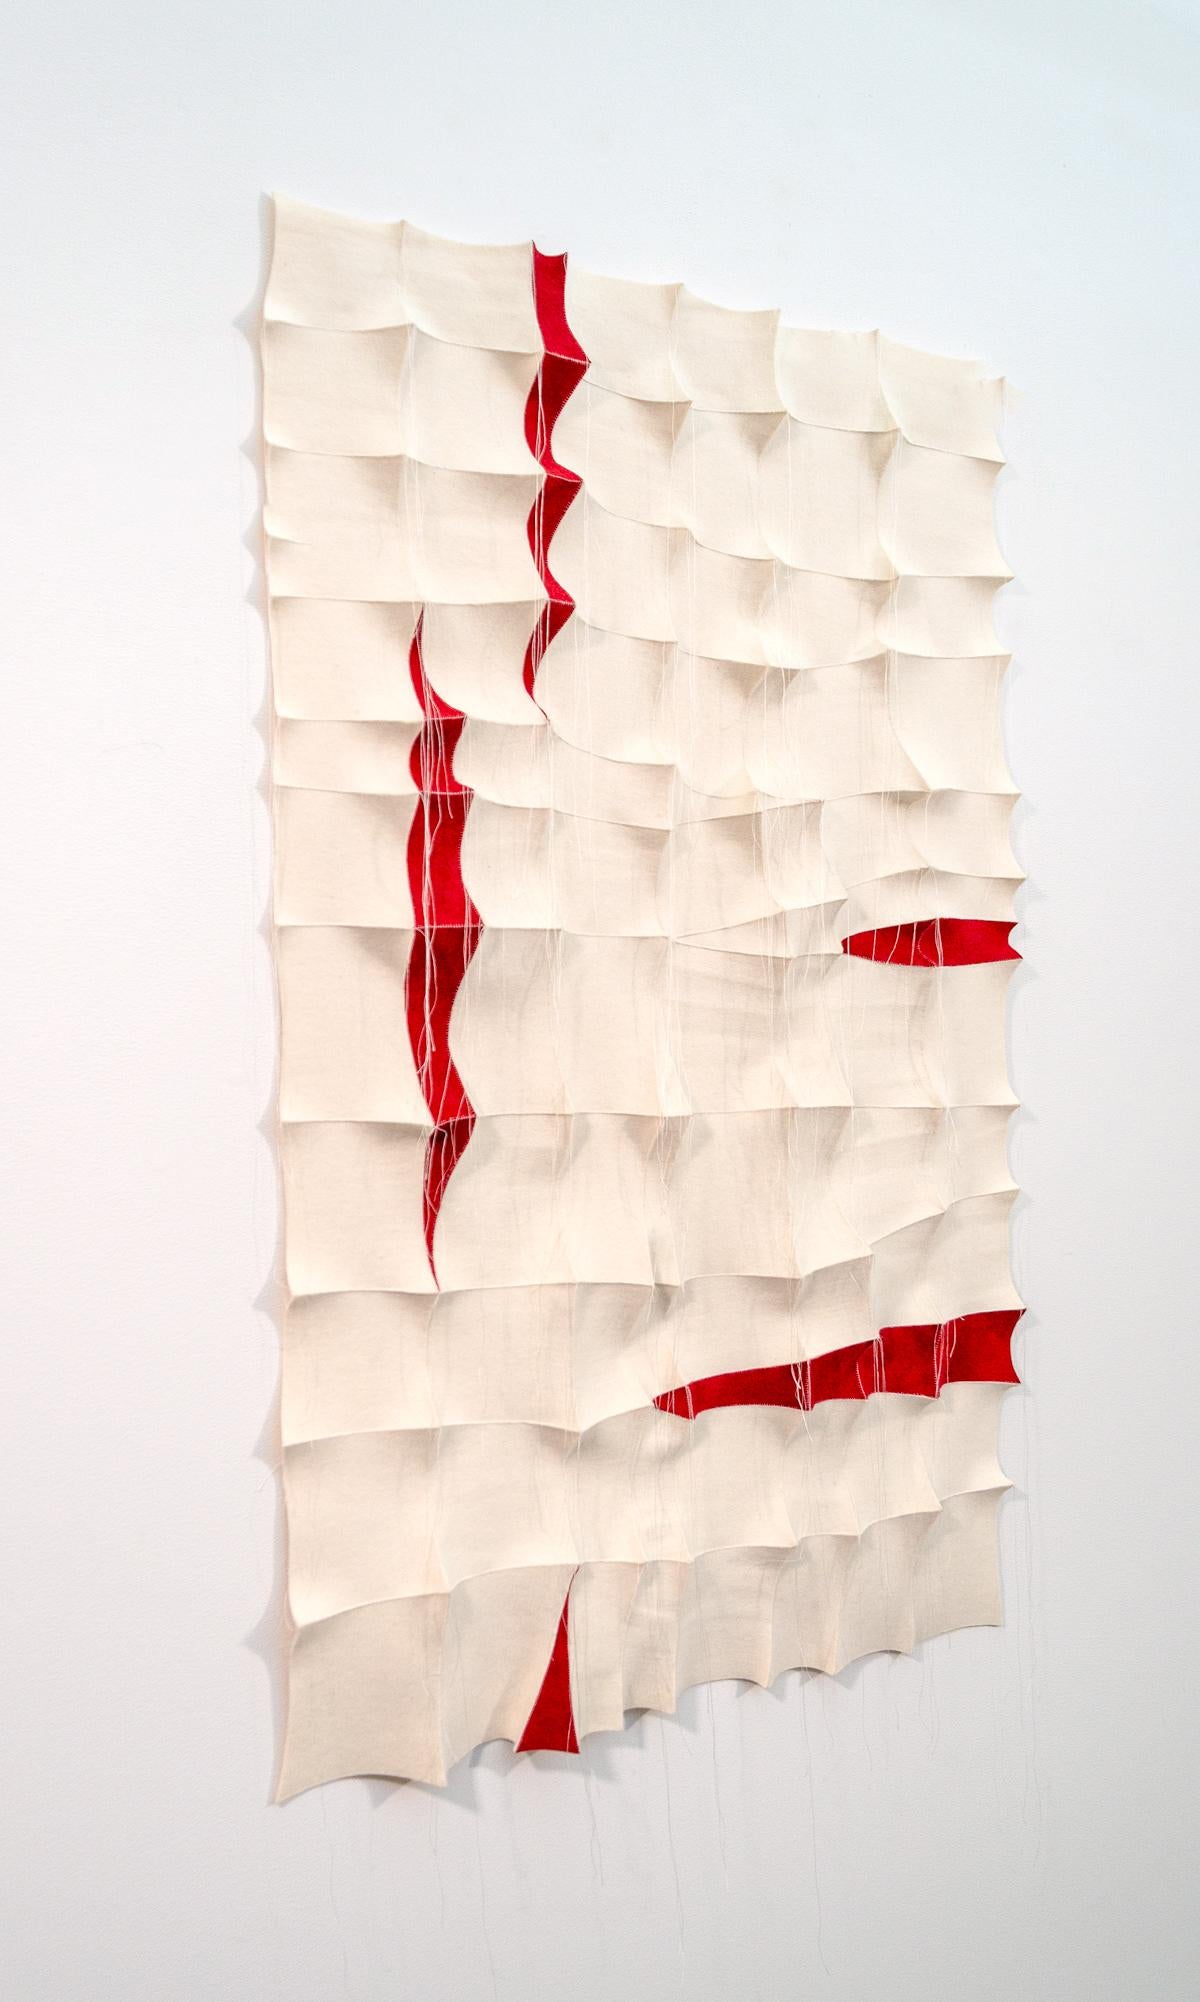 Tumsae No 1 - red, white, pattern, wall hanging, 3D, felt, textile, tapestry - Contemporary Mixed Media Art by Chung-Im Kim